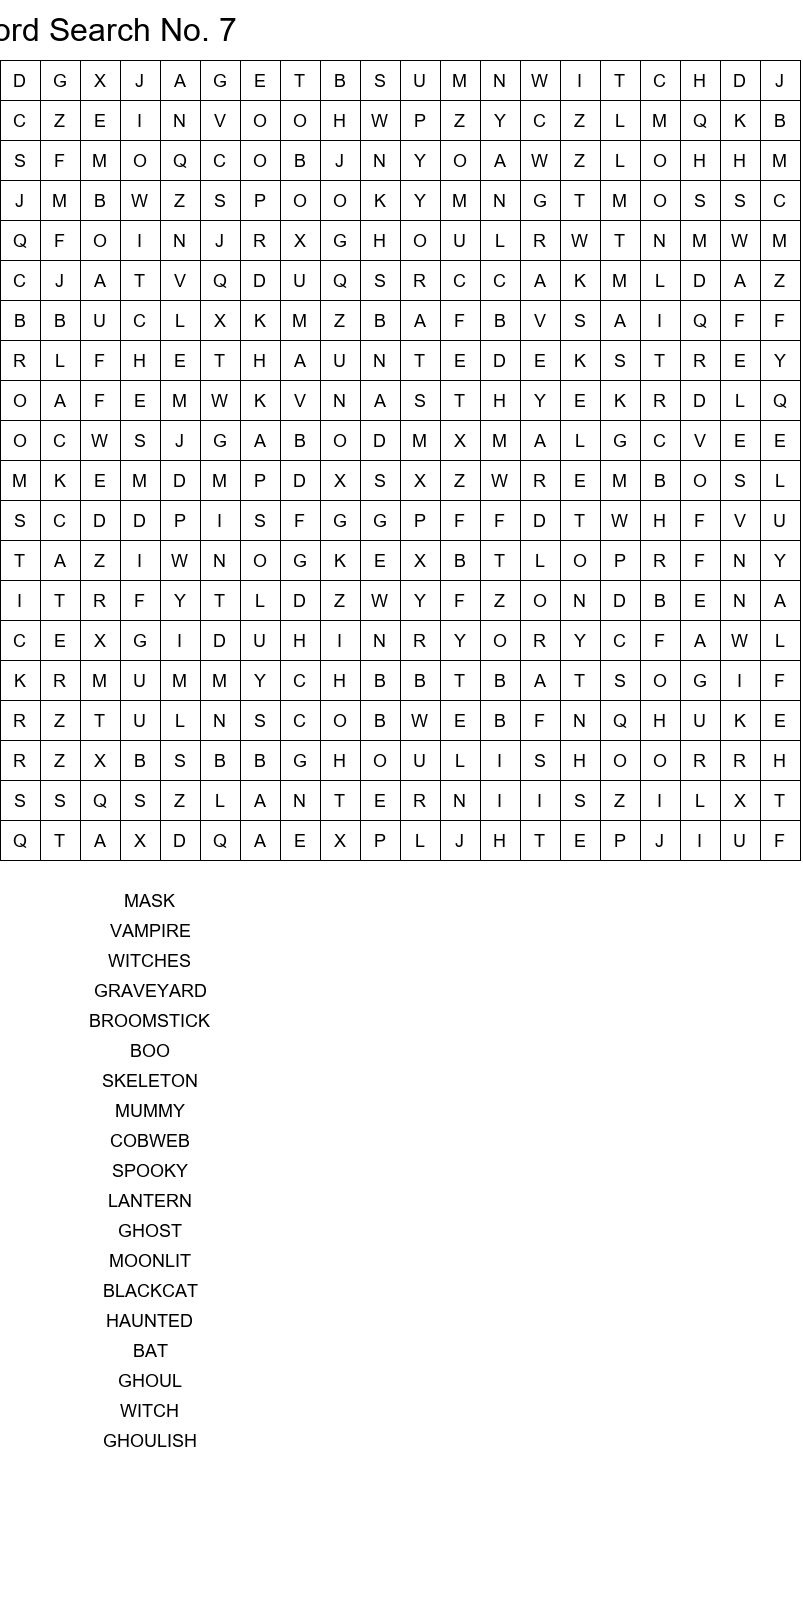 Top 20x20 Halloween word search with answers size 20x20 No 7